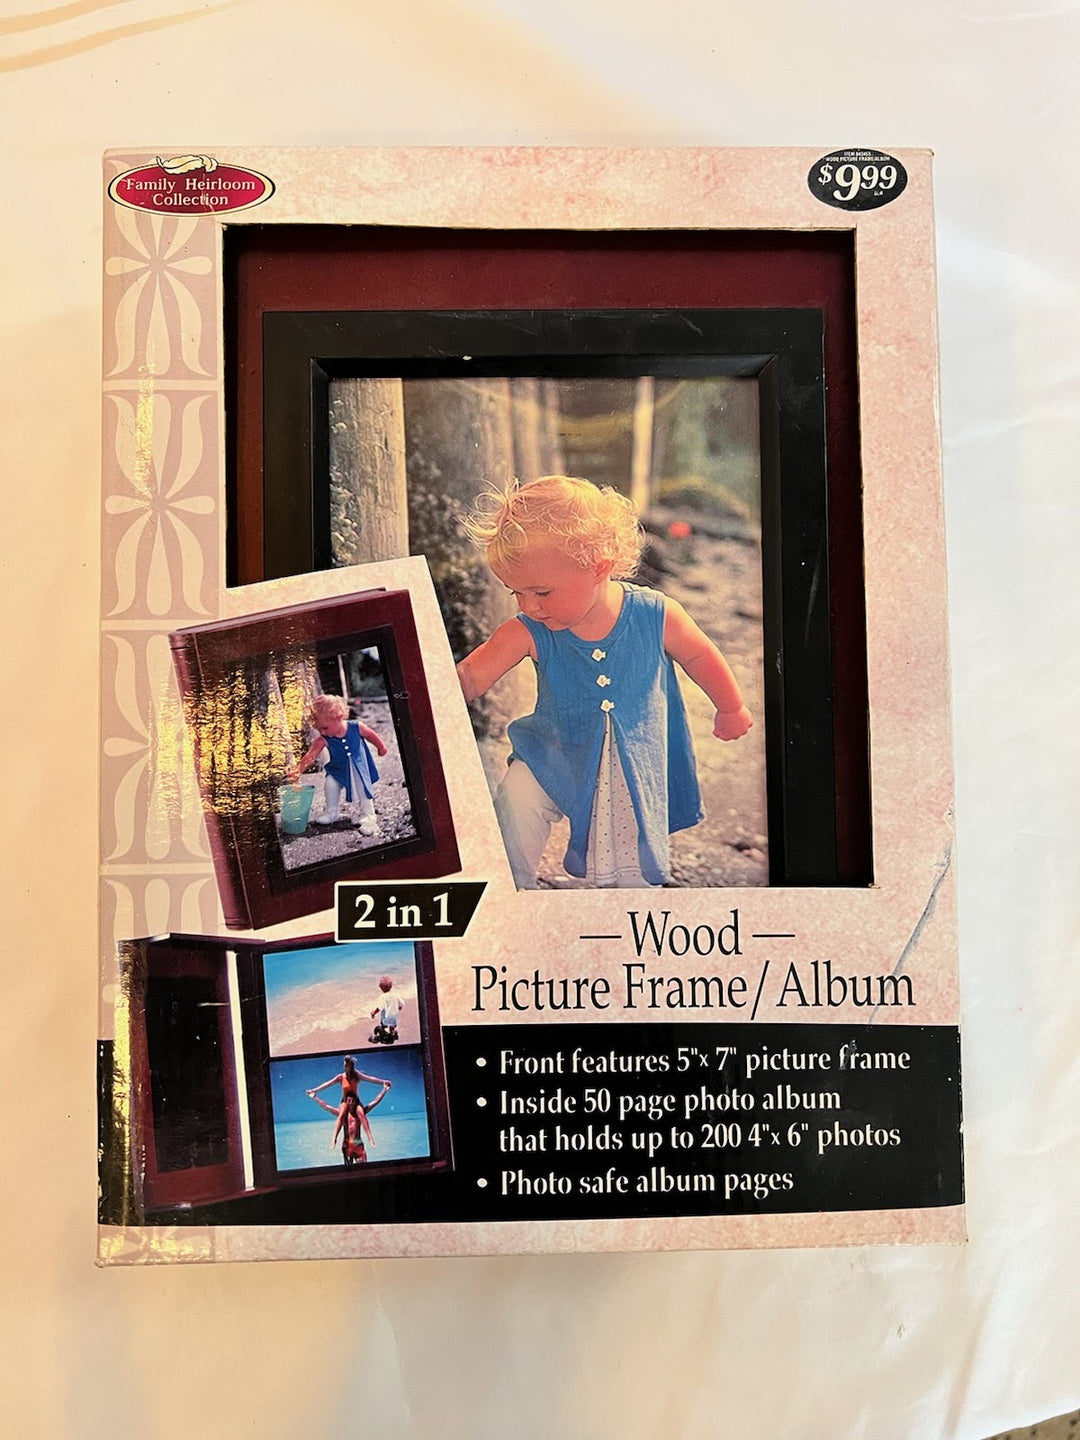 wood 2 in 1 picture frame / album